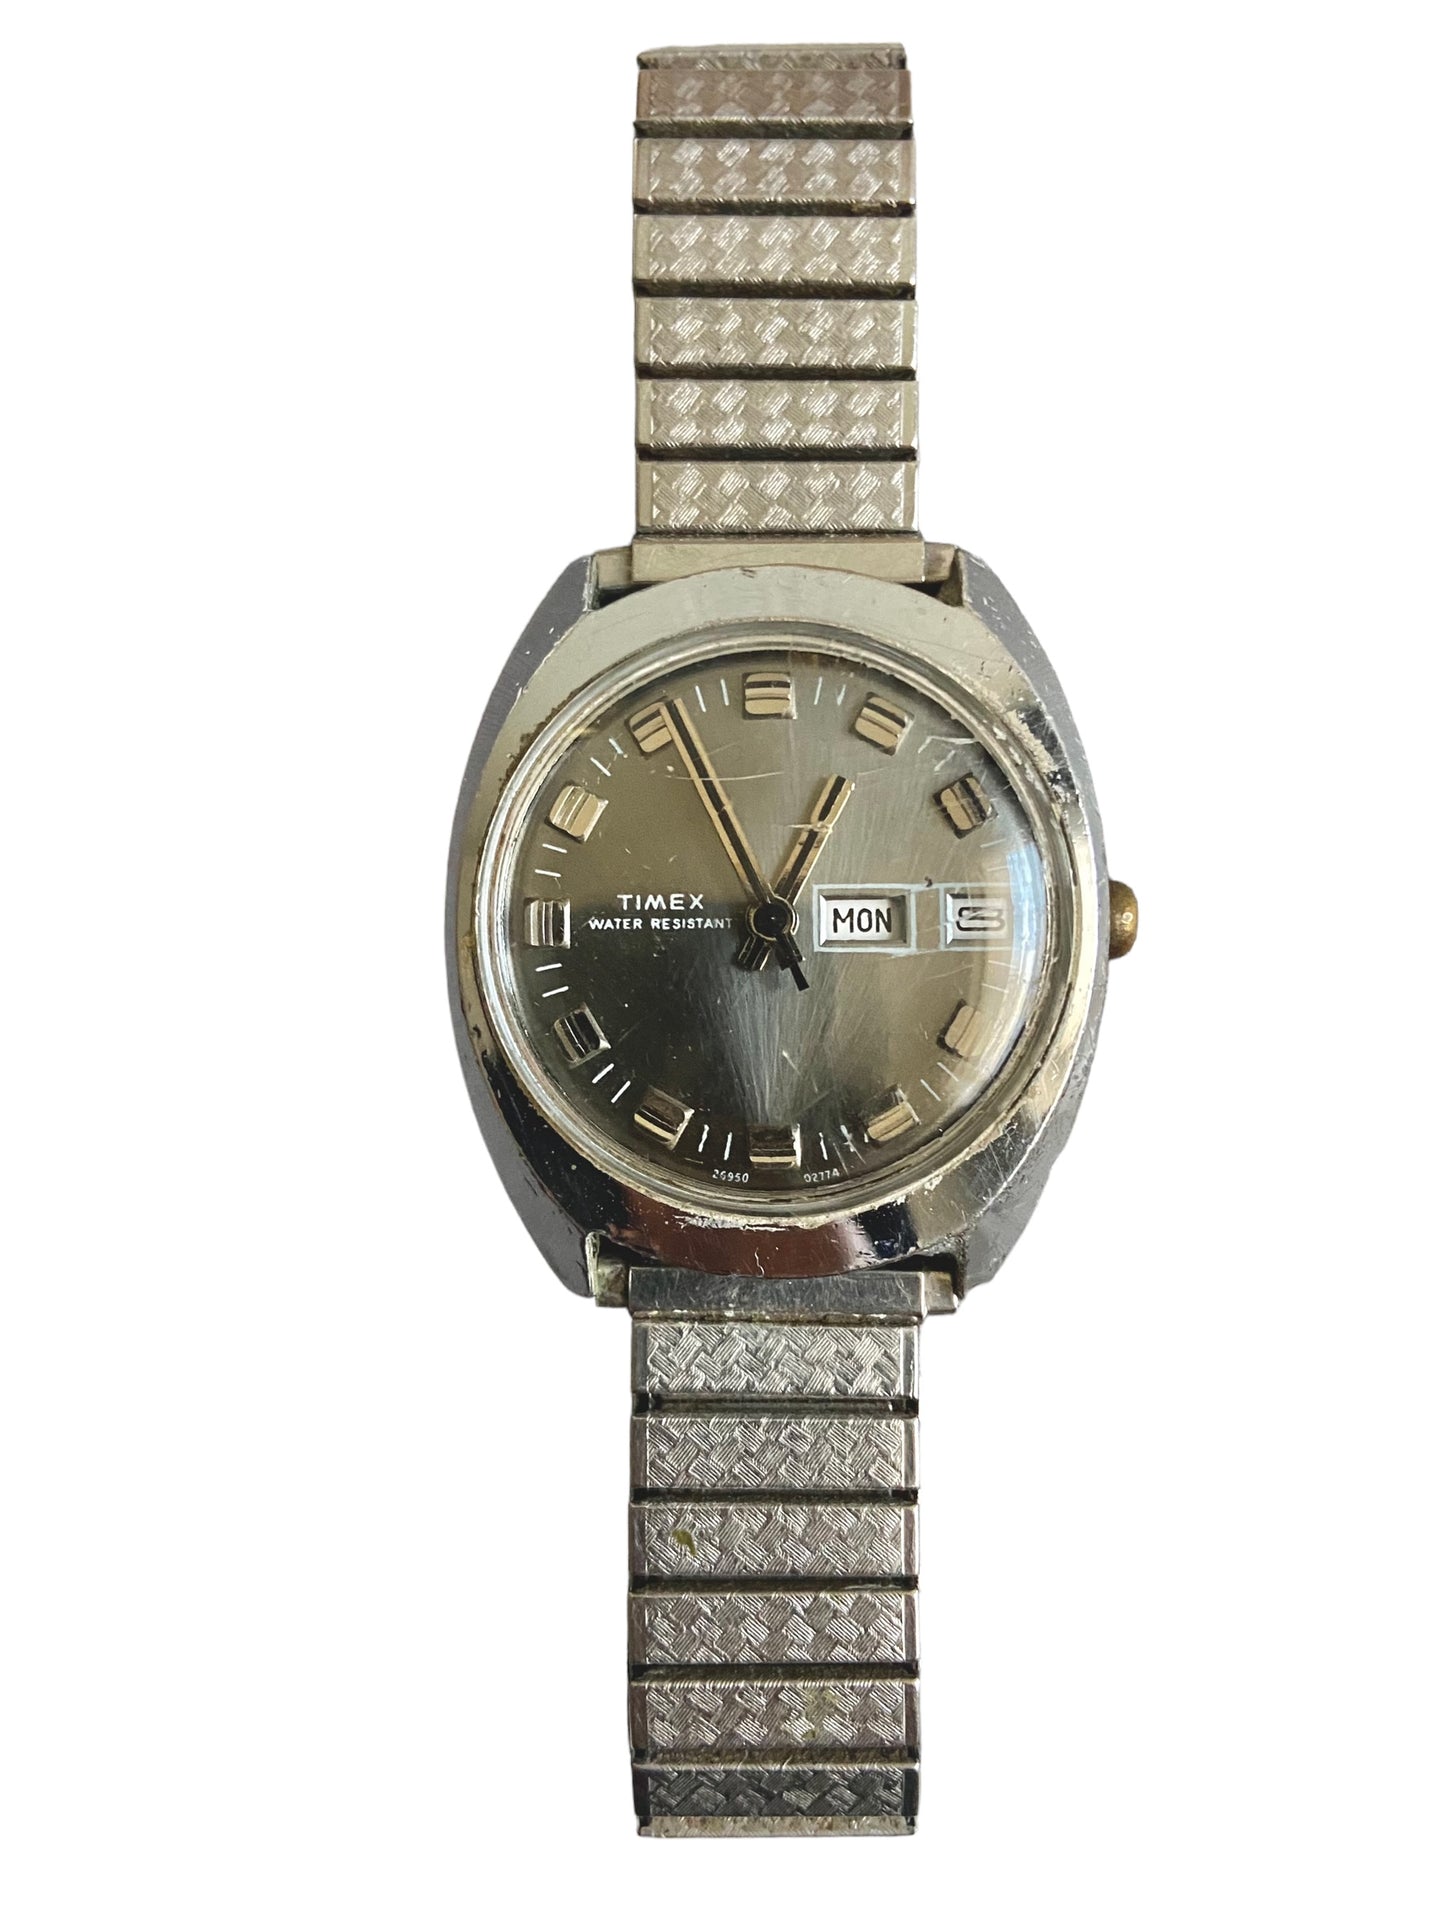 One-of-one | timex water resistant watch